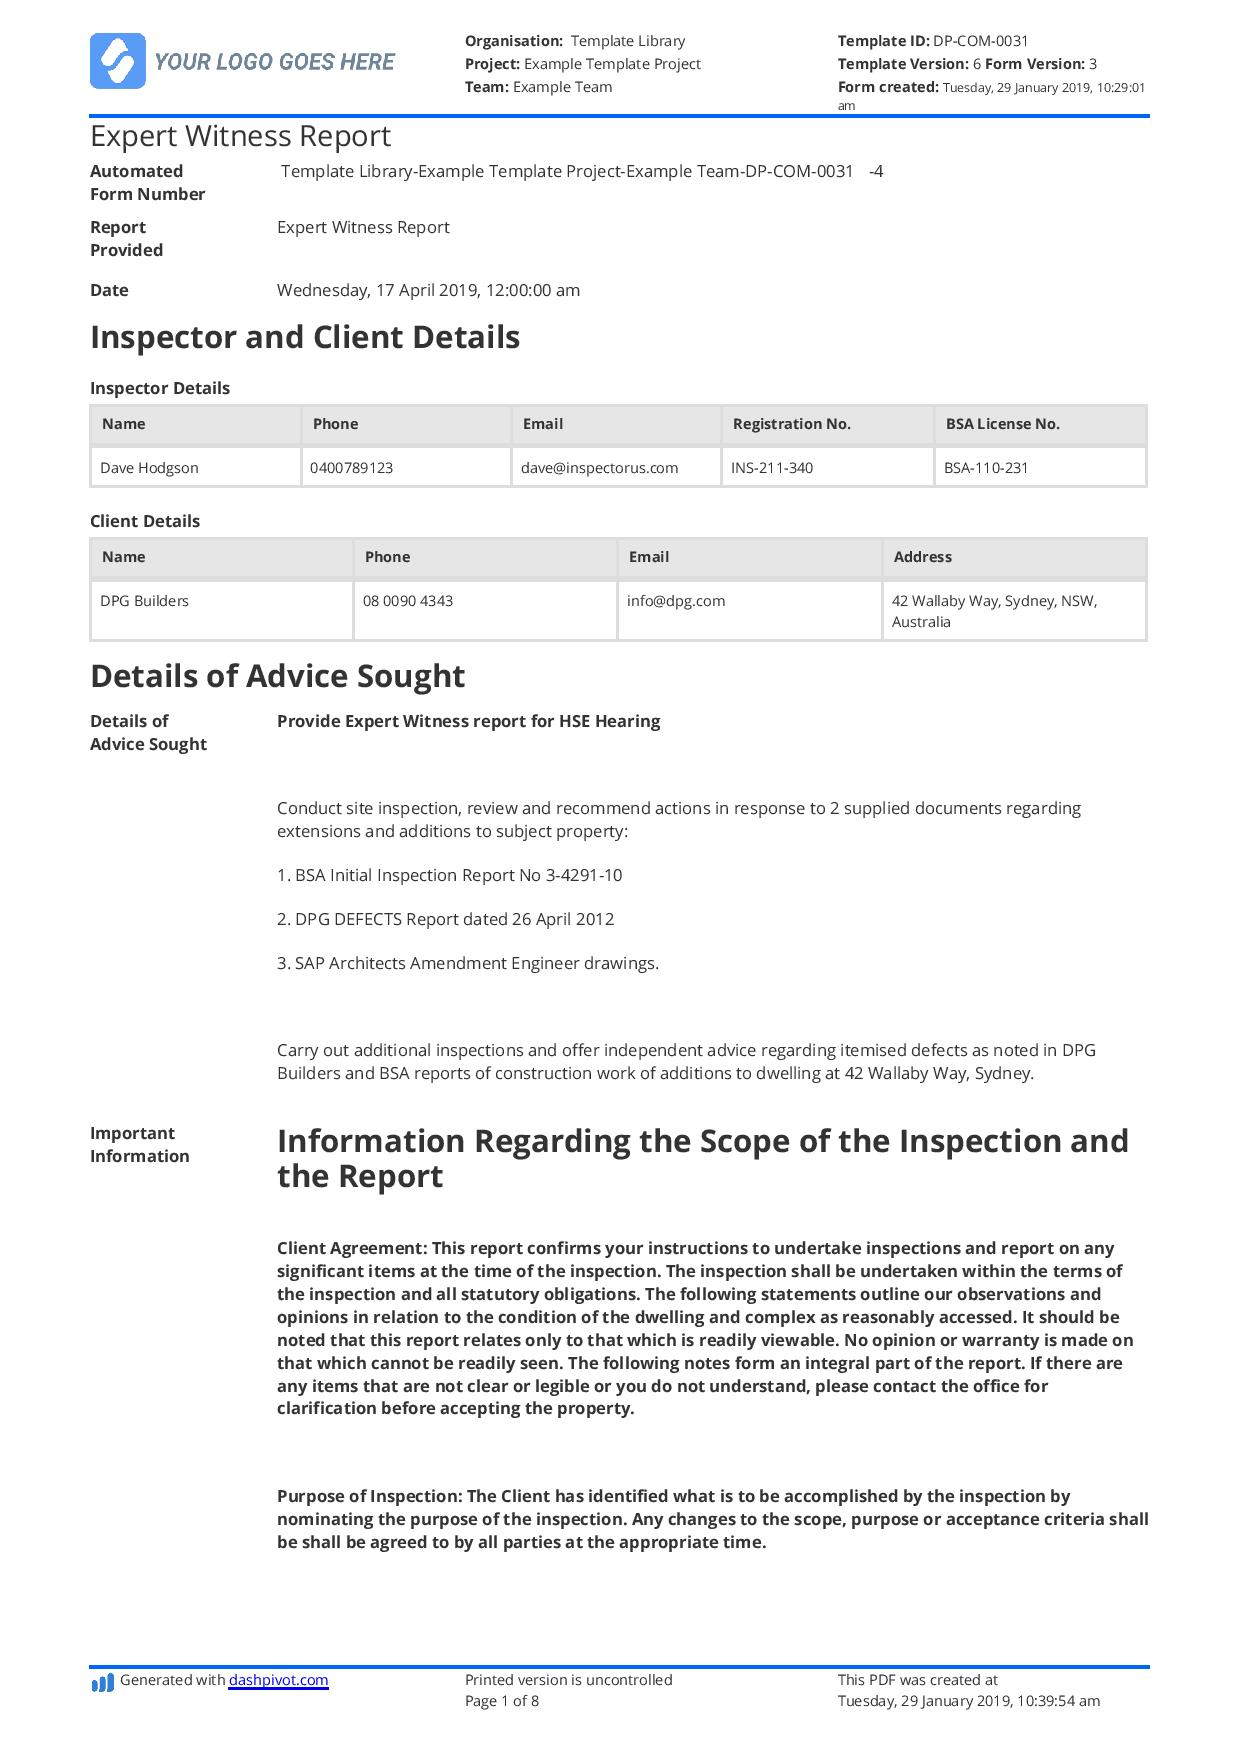 Construction Expert Witness Report example and editable template For Expert Witness Report Template